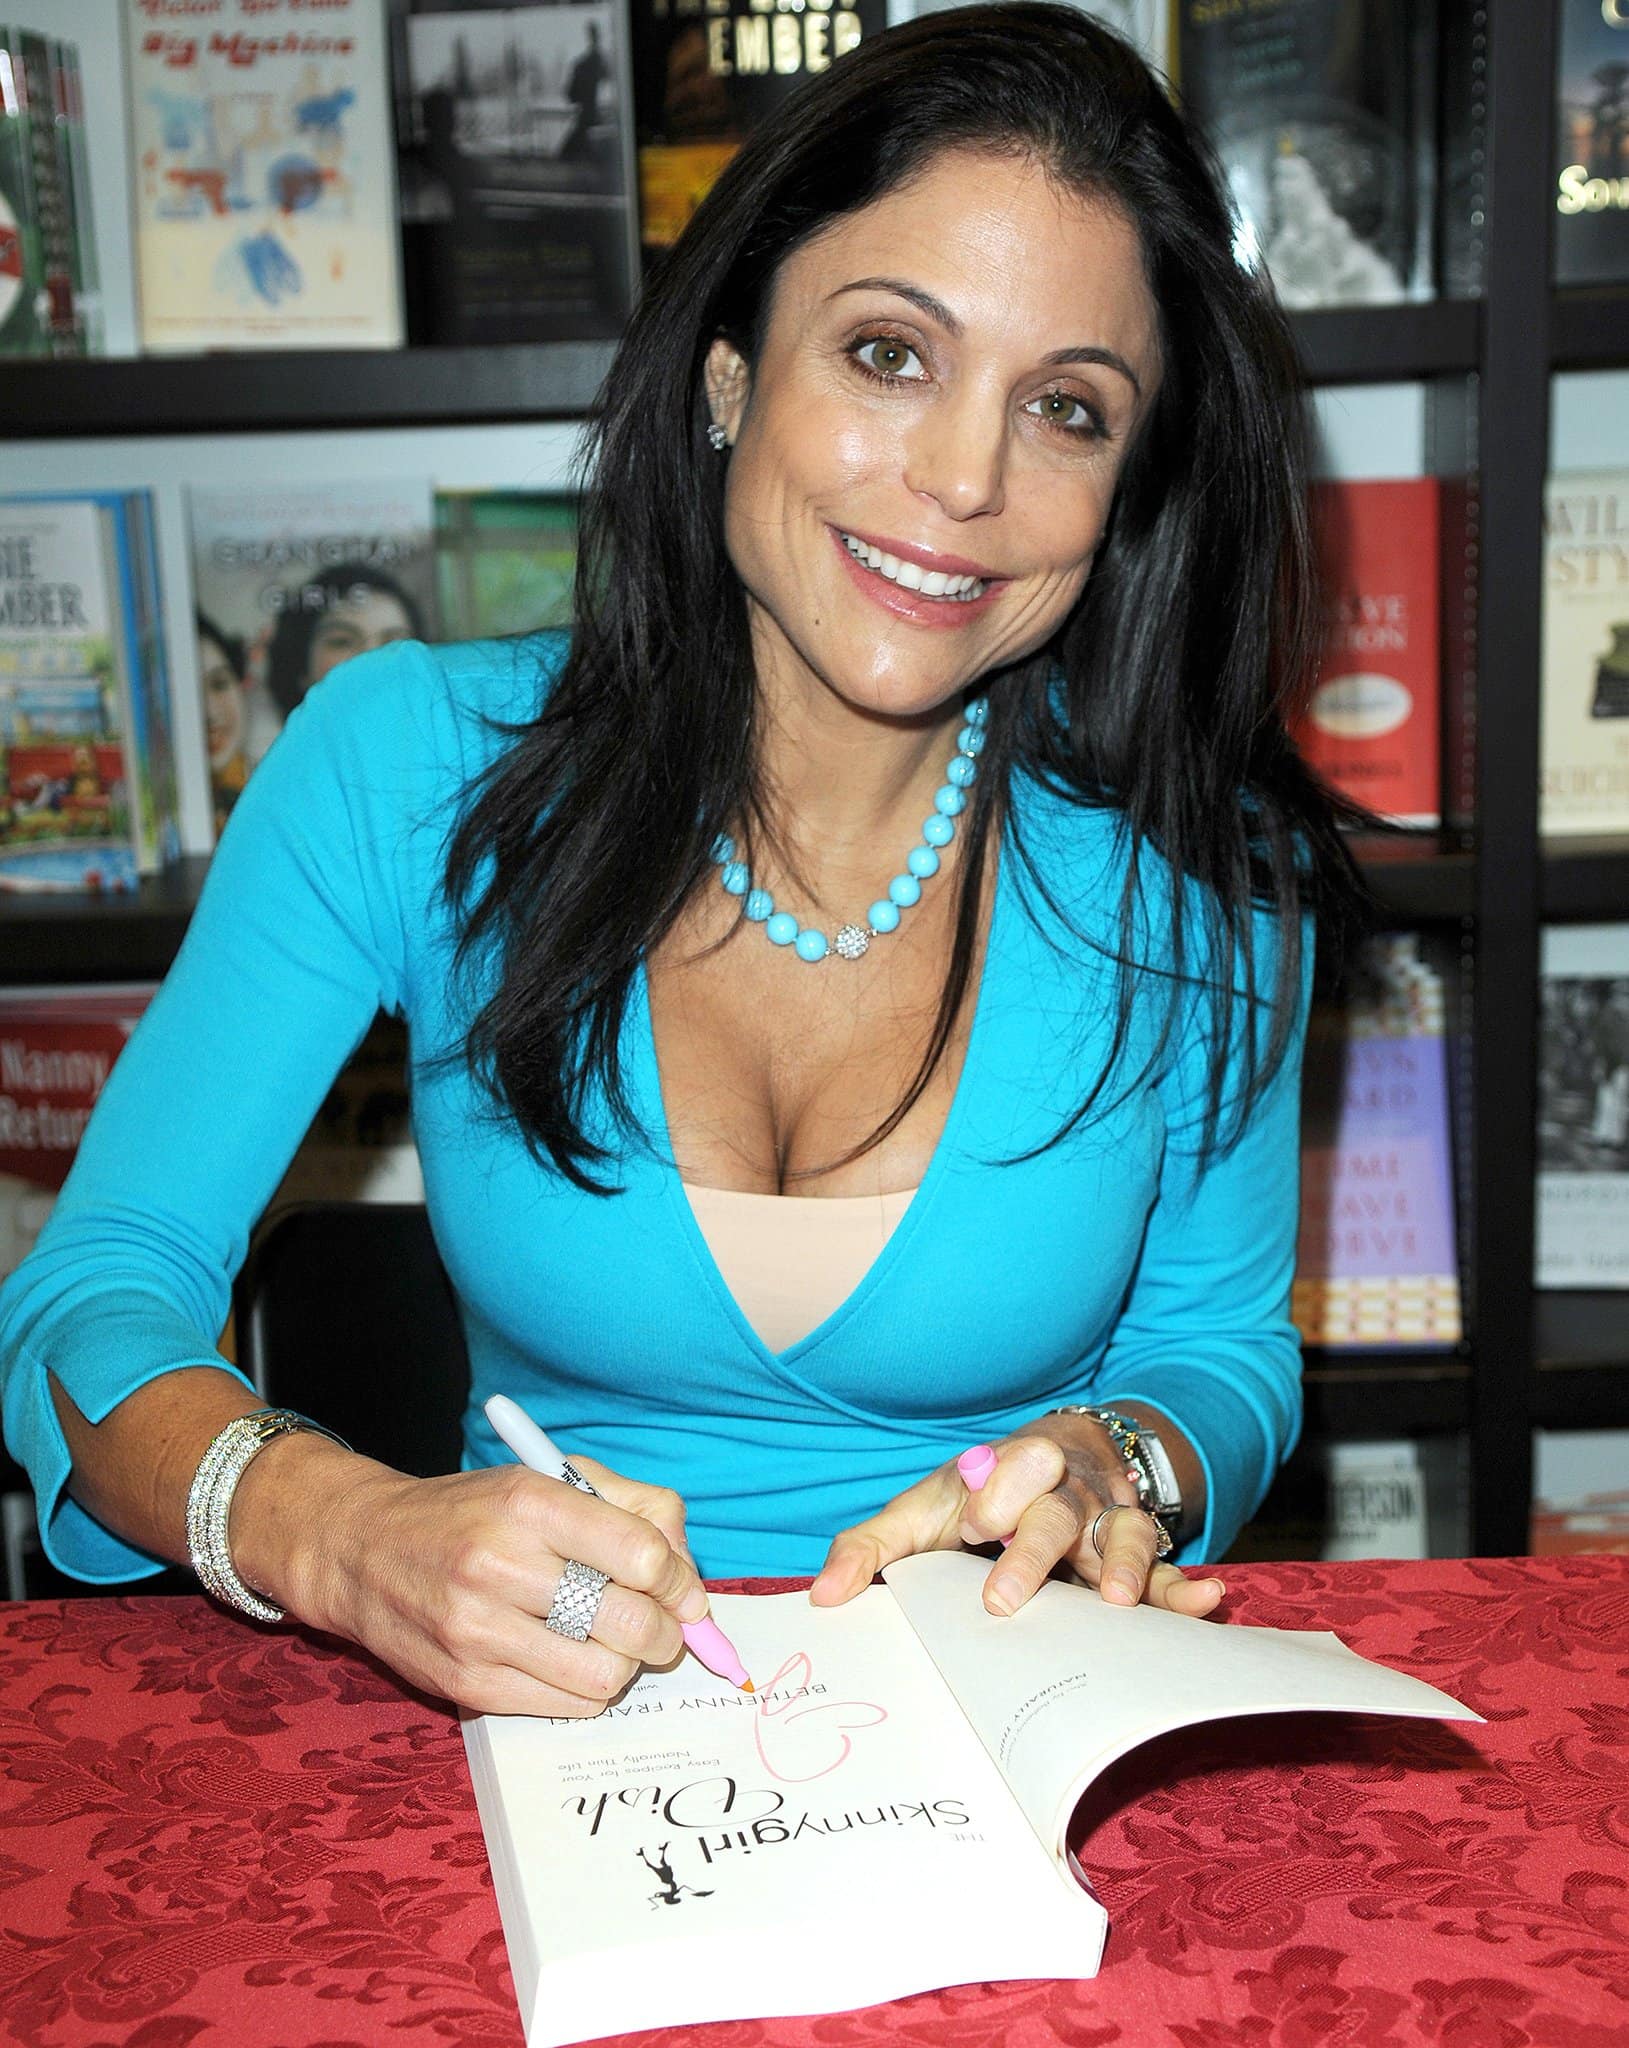 Bethenny Frankel presents her book "The Skinnygirl Dish" Jan. 10, 2010, at Books & Books in North Miami Beach, Florida